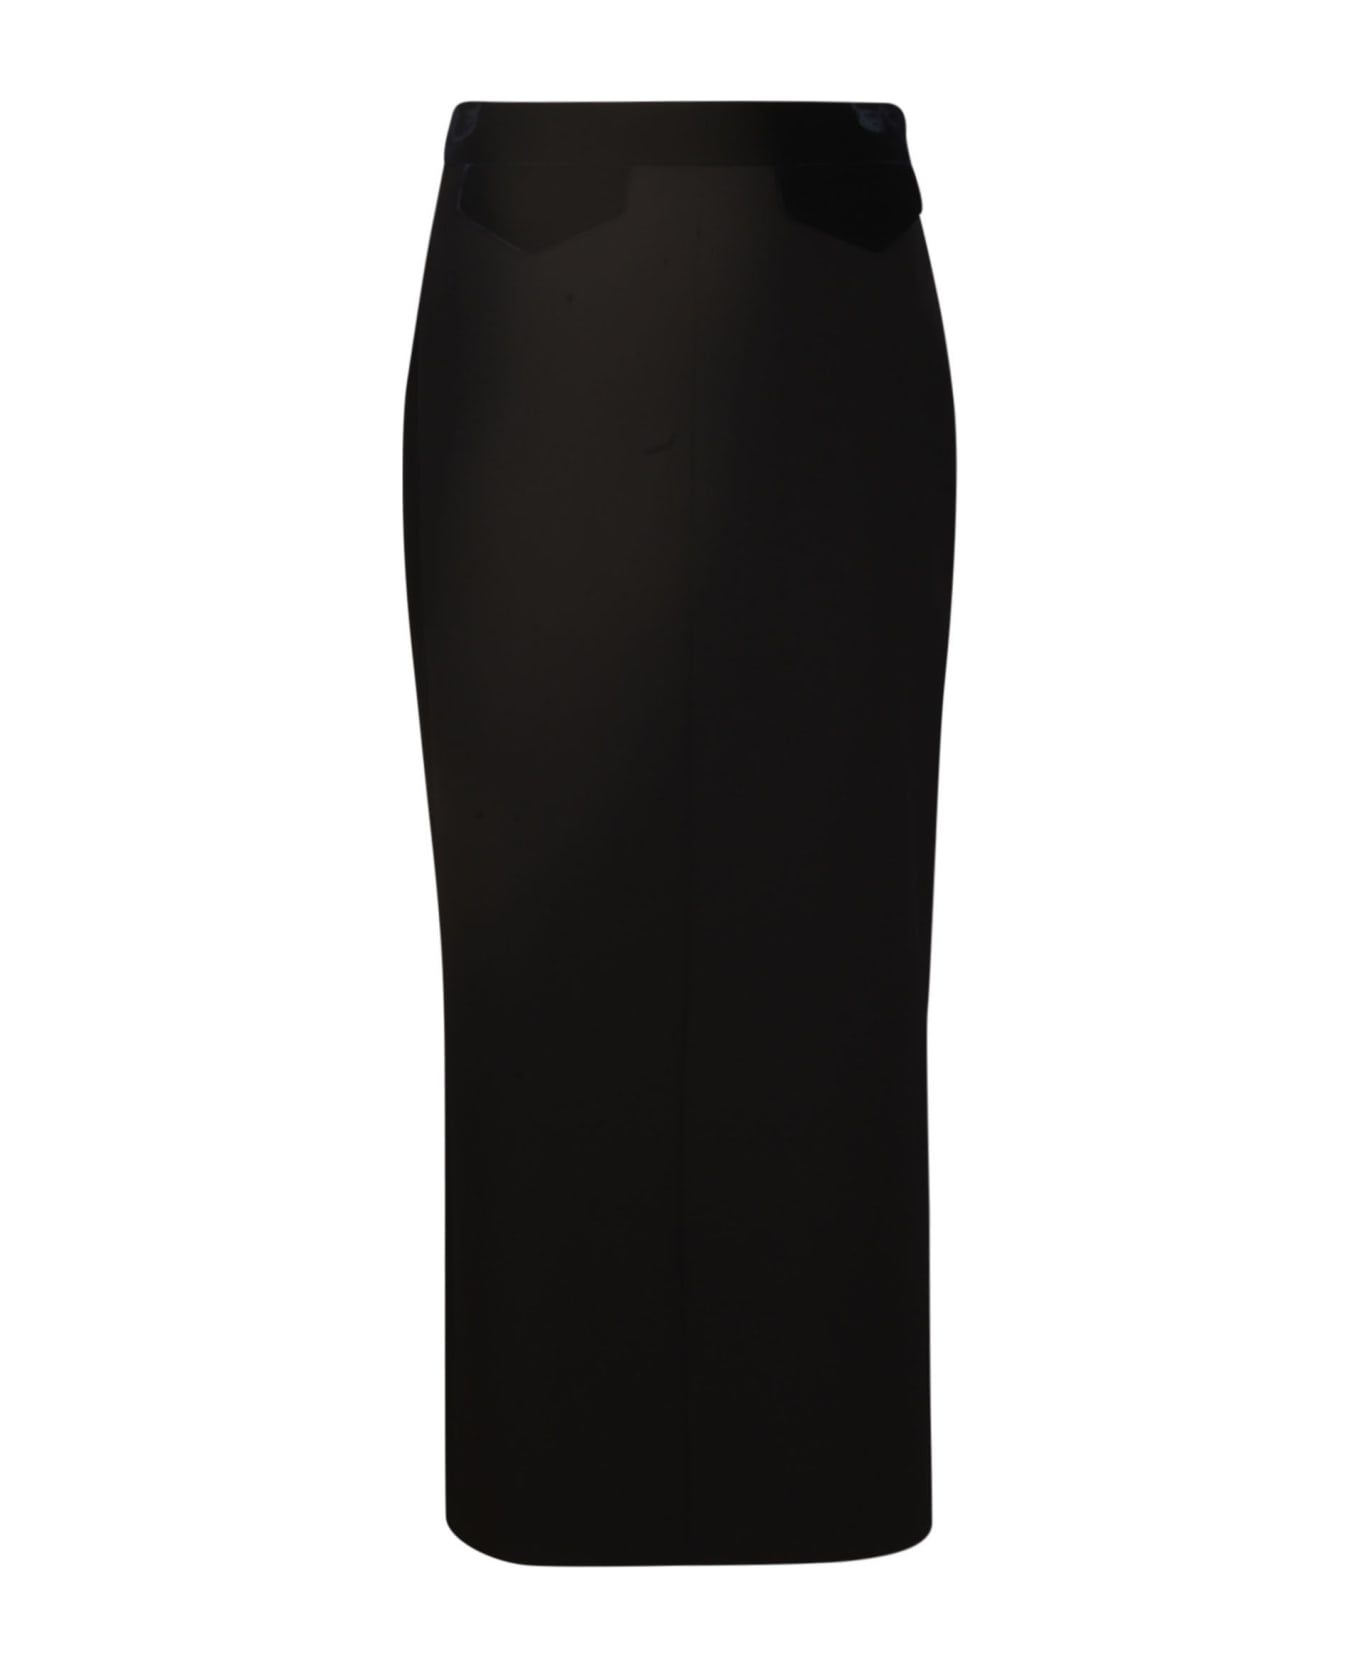 Giorgio Armani Long Length Fitted Skirt - Pz01